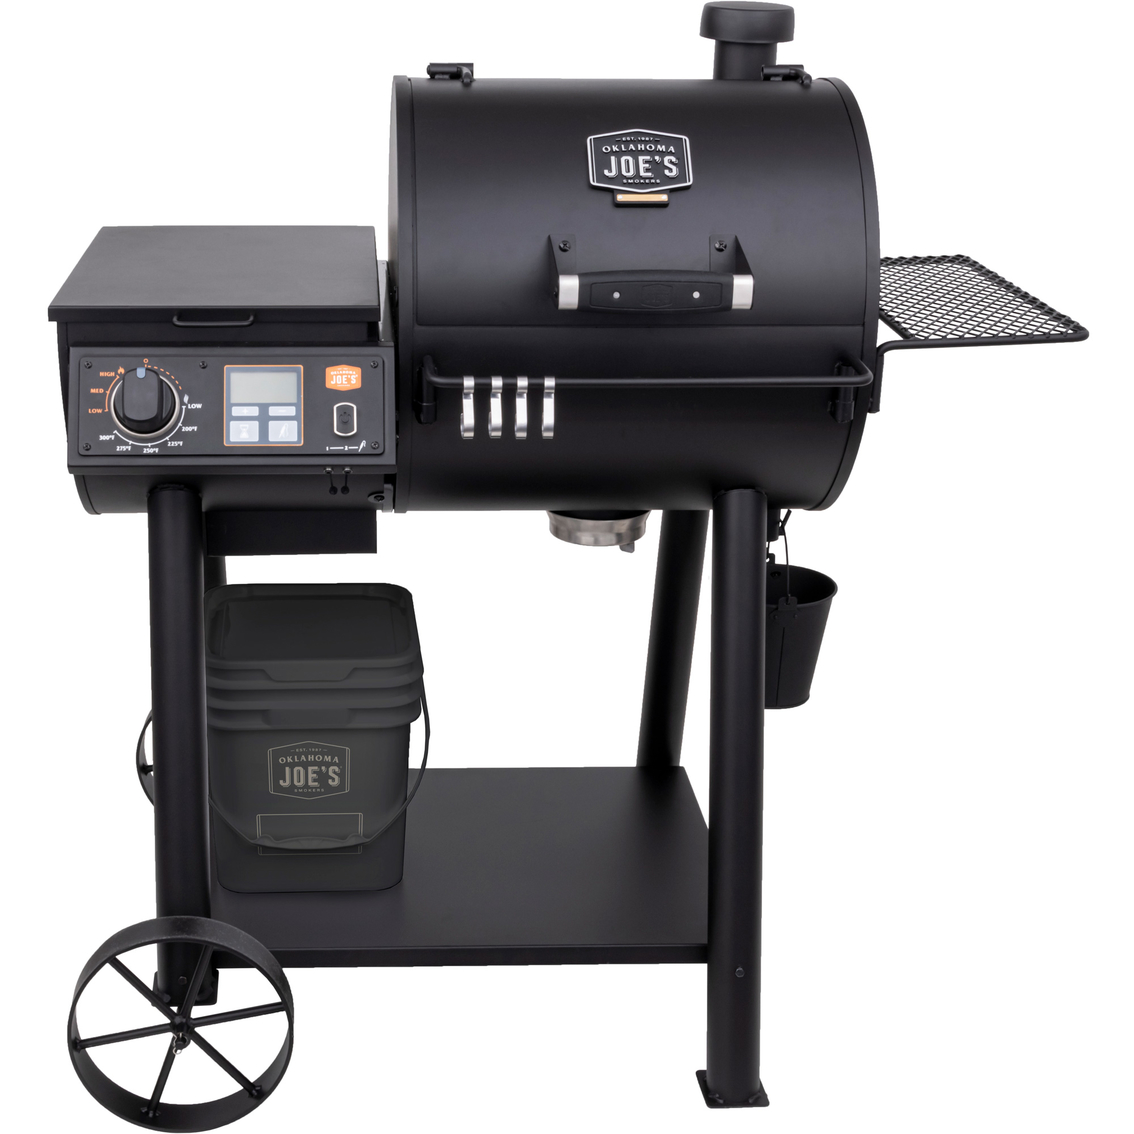 Oklahoma Joe S Rider Mini Pellet Smoker Grills Smokers Fryers Patio Garden Garage Shop The Exchange,What Is A Pergola Used For